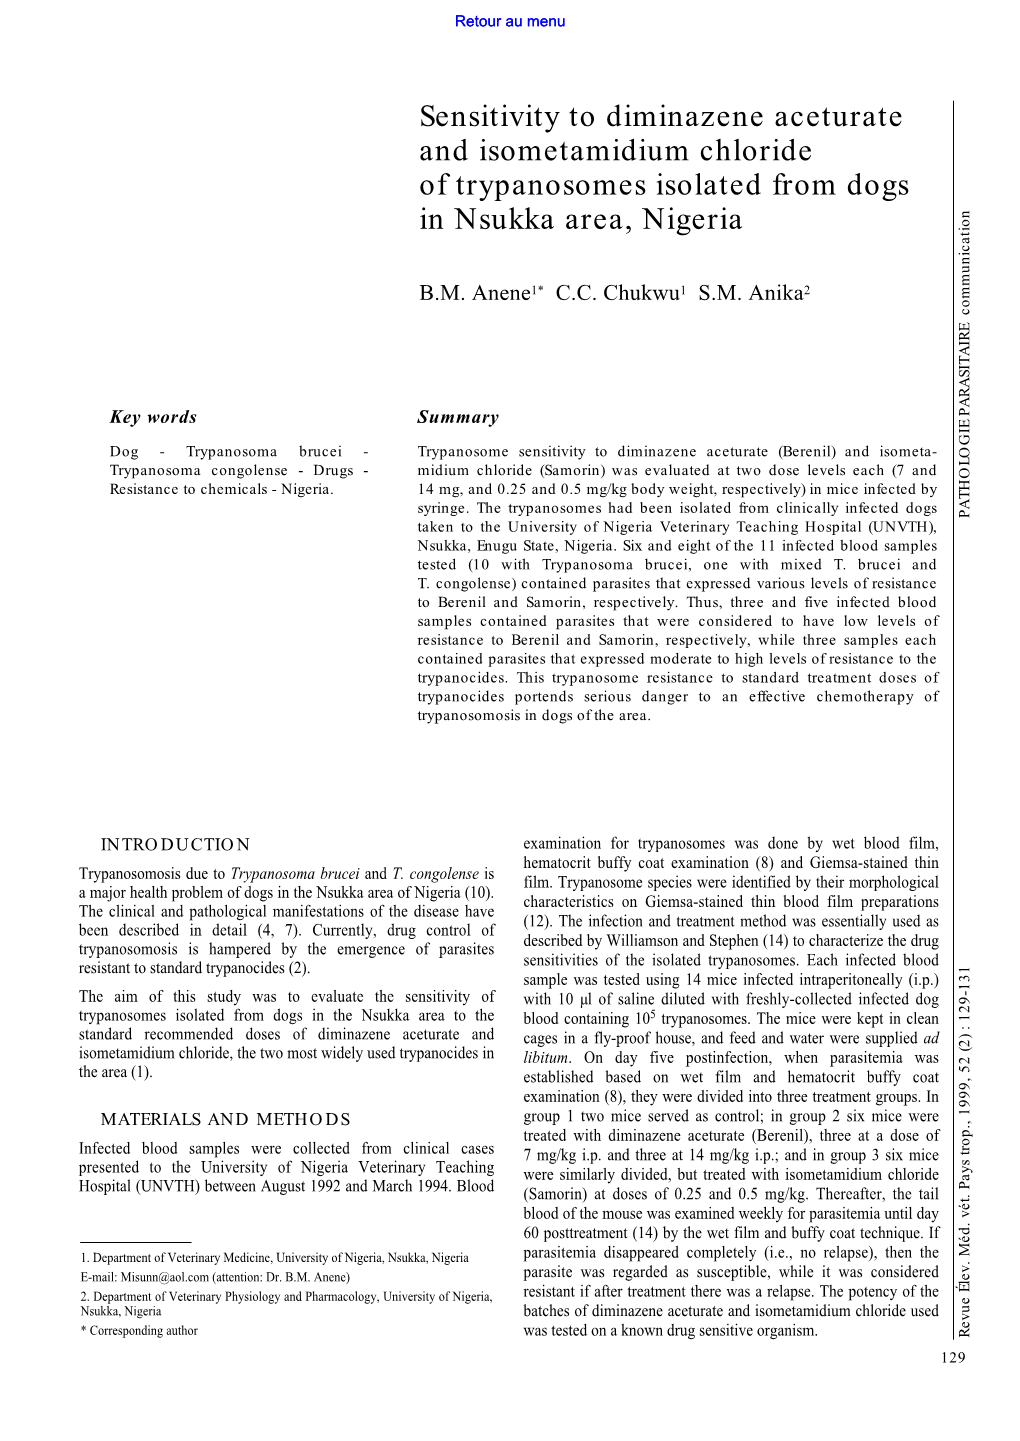 Sensitivity to Diminazene Aceturate and Isometamidium Chloride of Trypanosomes Isolated from Dogs in Nsukka Area, Nigeria